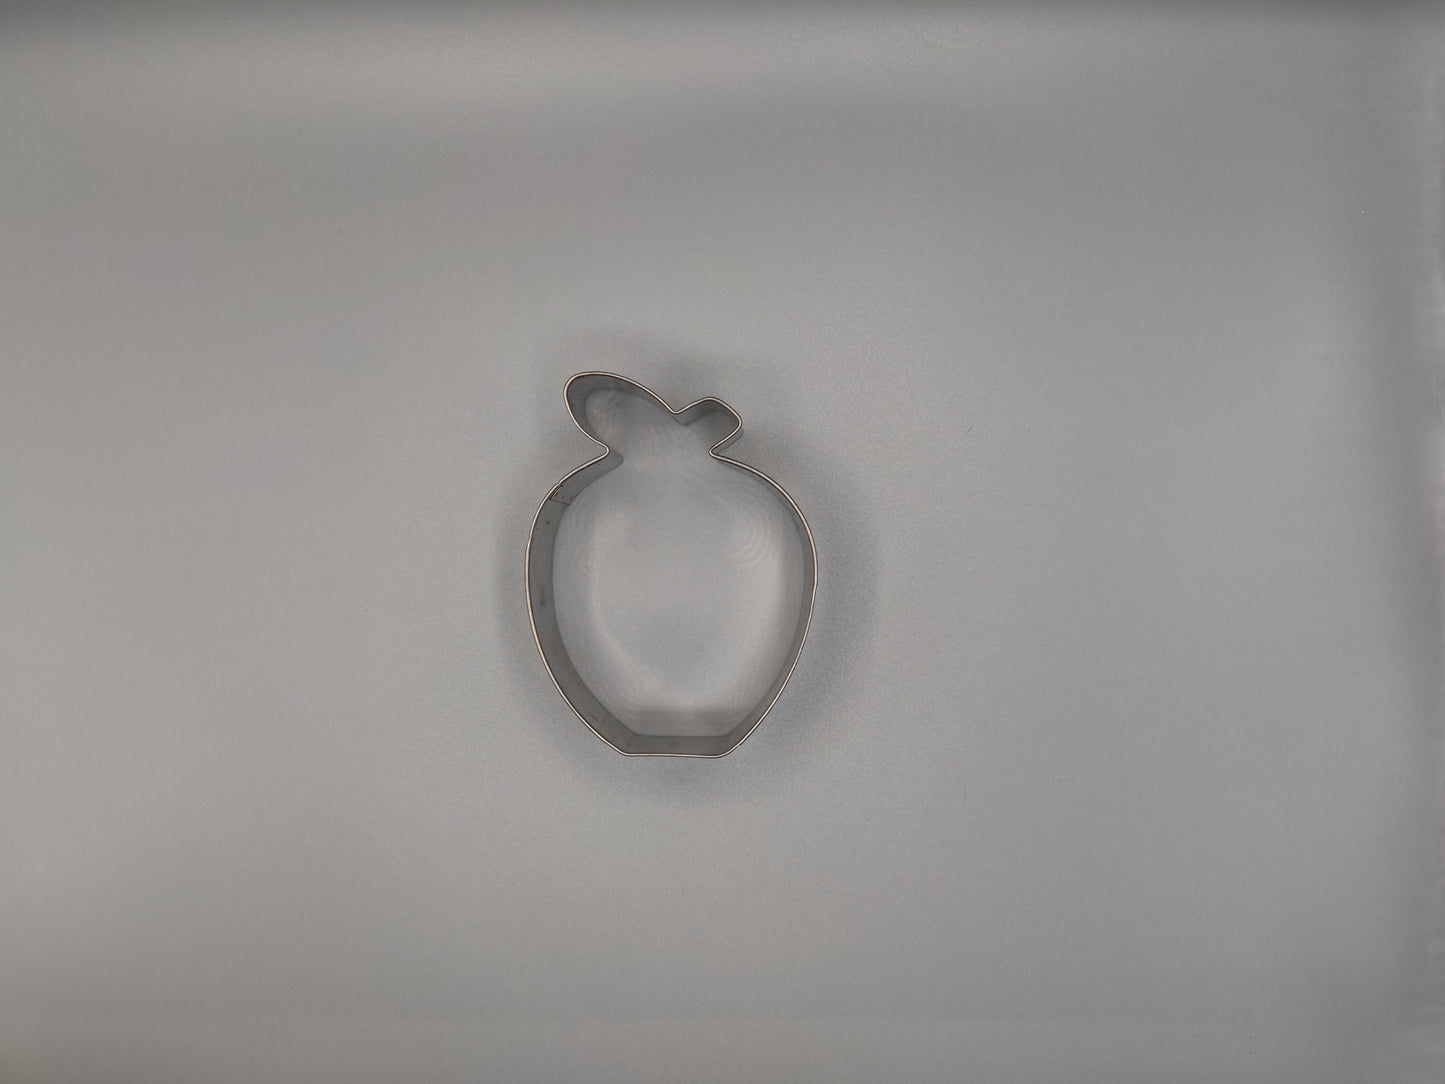 Small Apple Cookie Cutter (3")